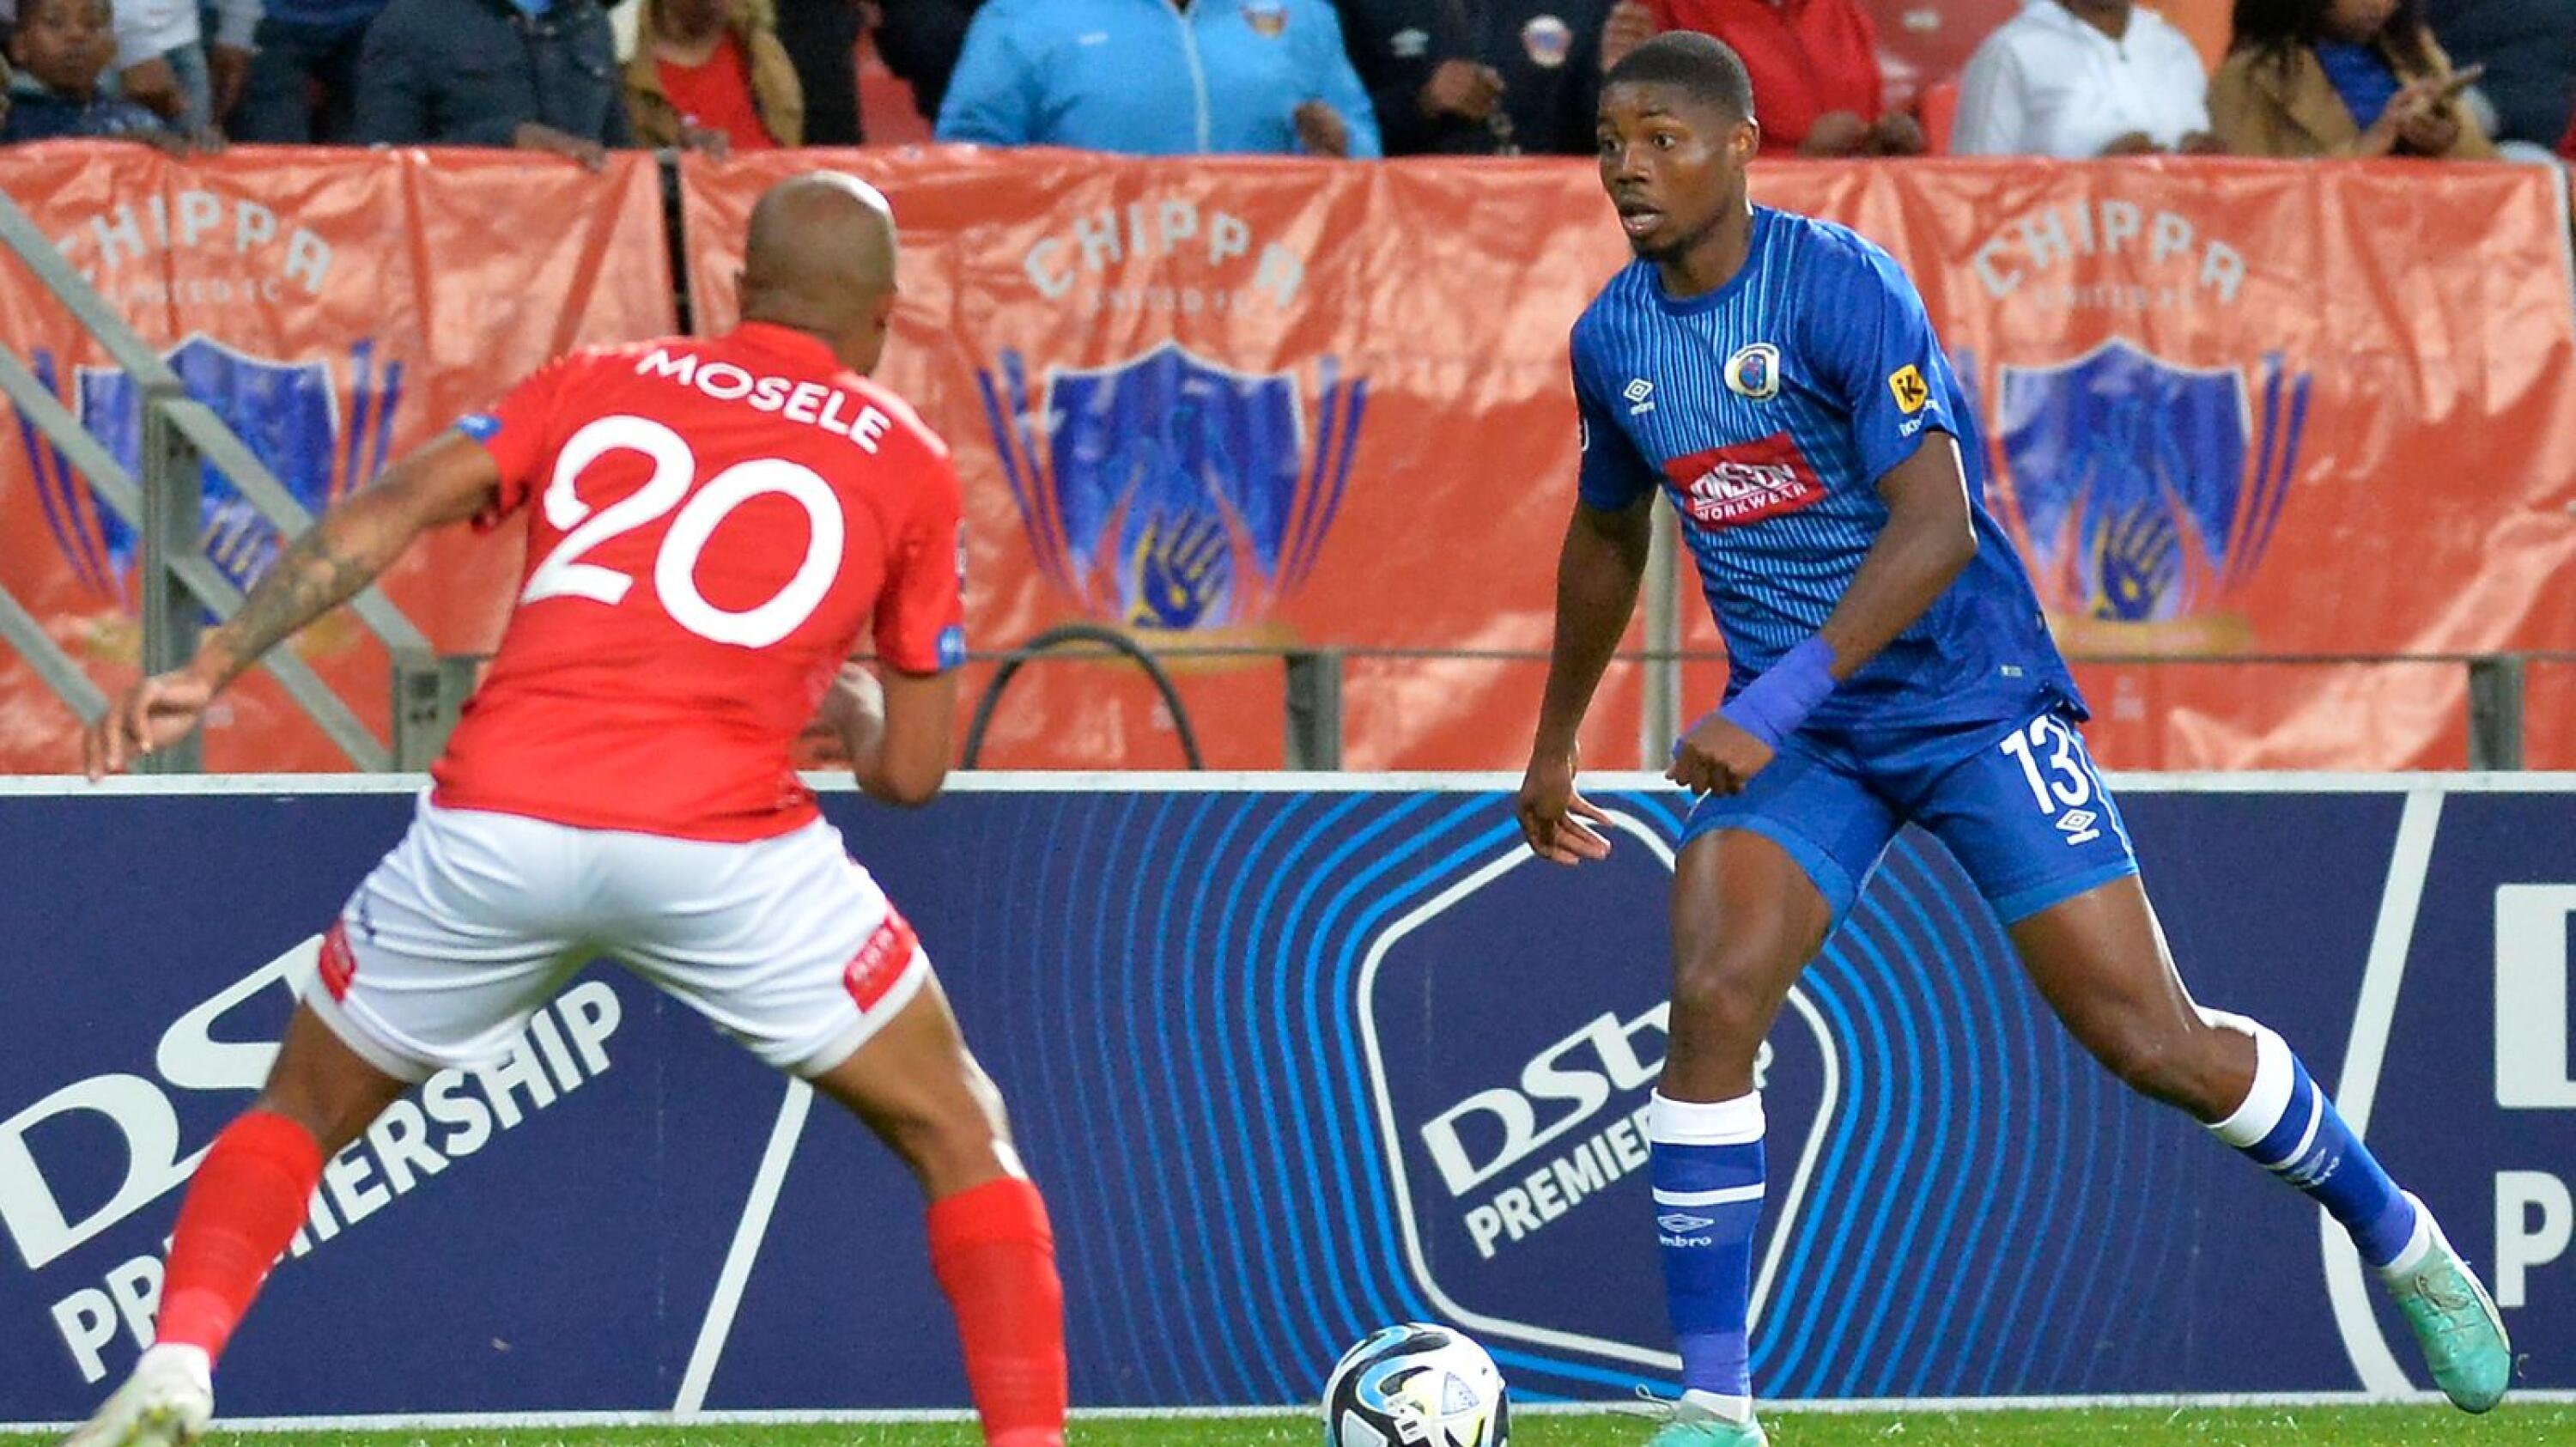 Goodman Mosele of Chippa United and Ime Okonof Supersport United fight for the ball during their DStv Premiership game at Nelson Mandela Bay Stadium in Gqeberha on Tuesday